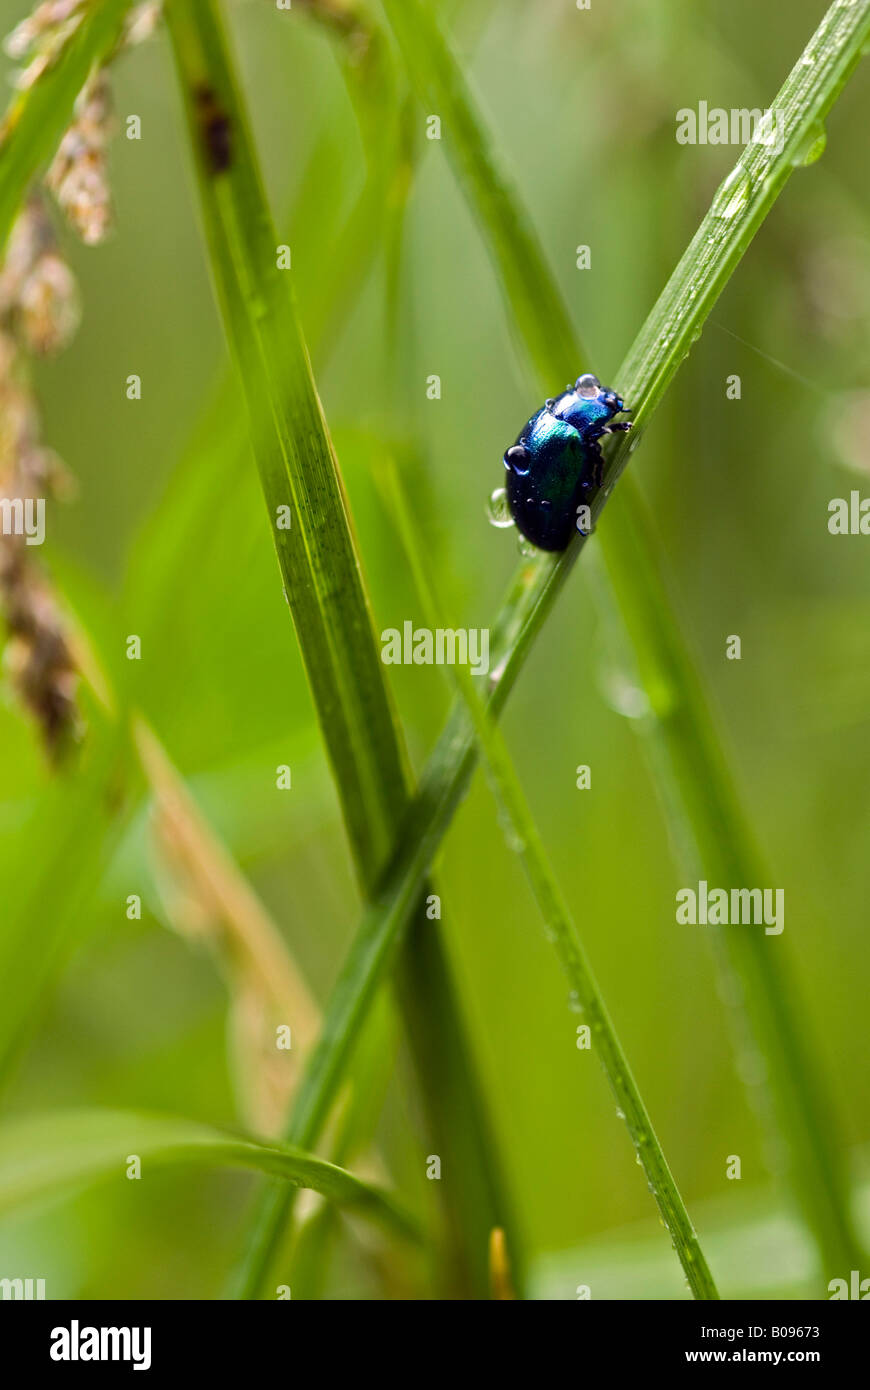 Imported Willow Leaf Beetle (Plagiodera versicolora), Riedener See, Lechtal, Tyrol, Austria, Europe Stock Photo